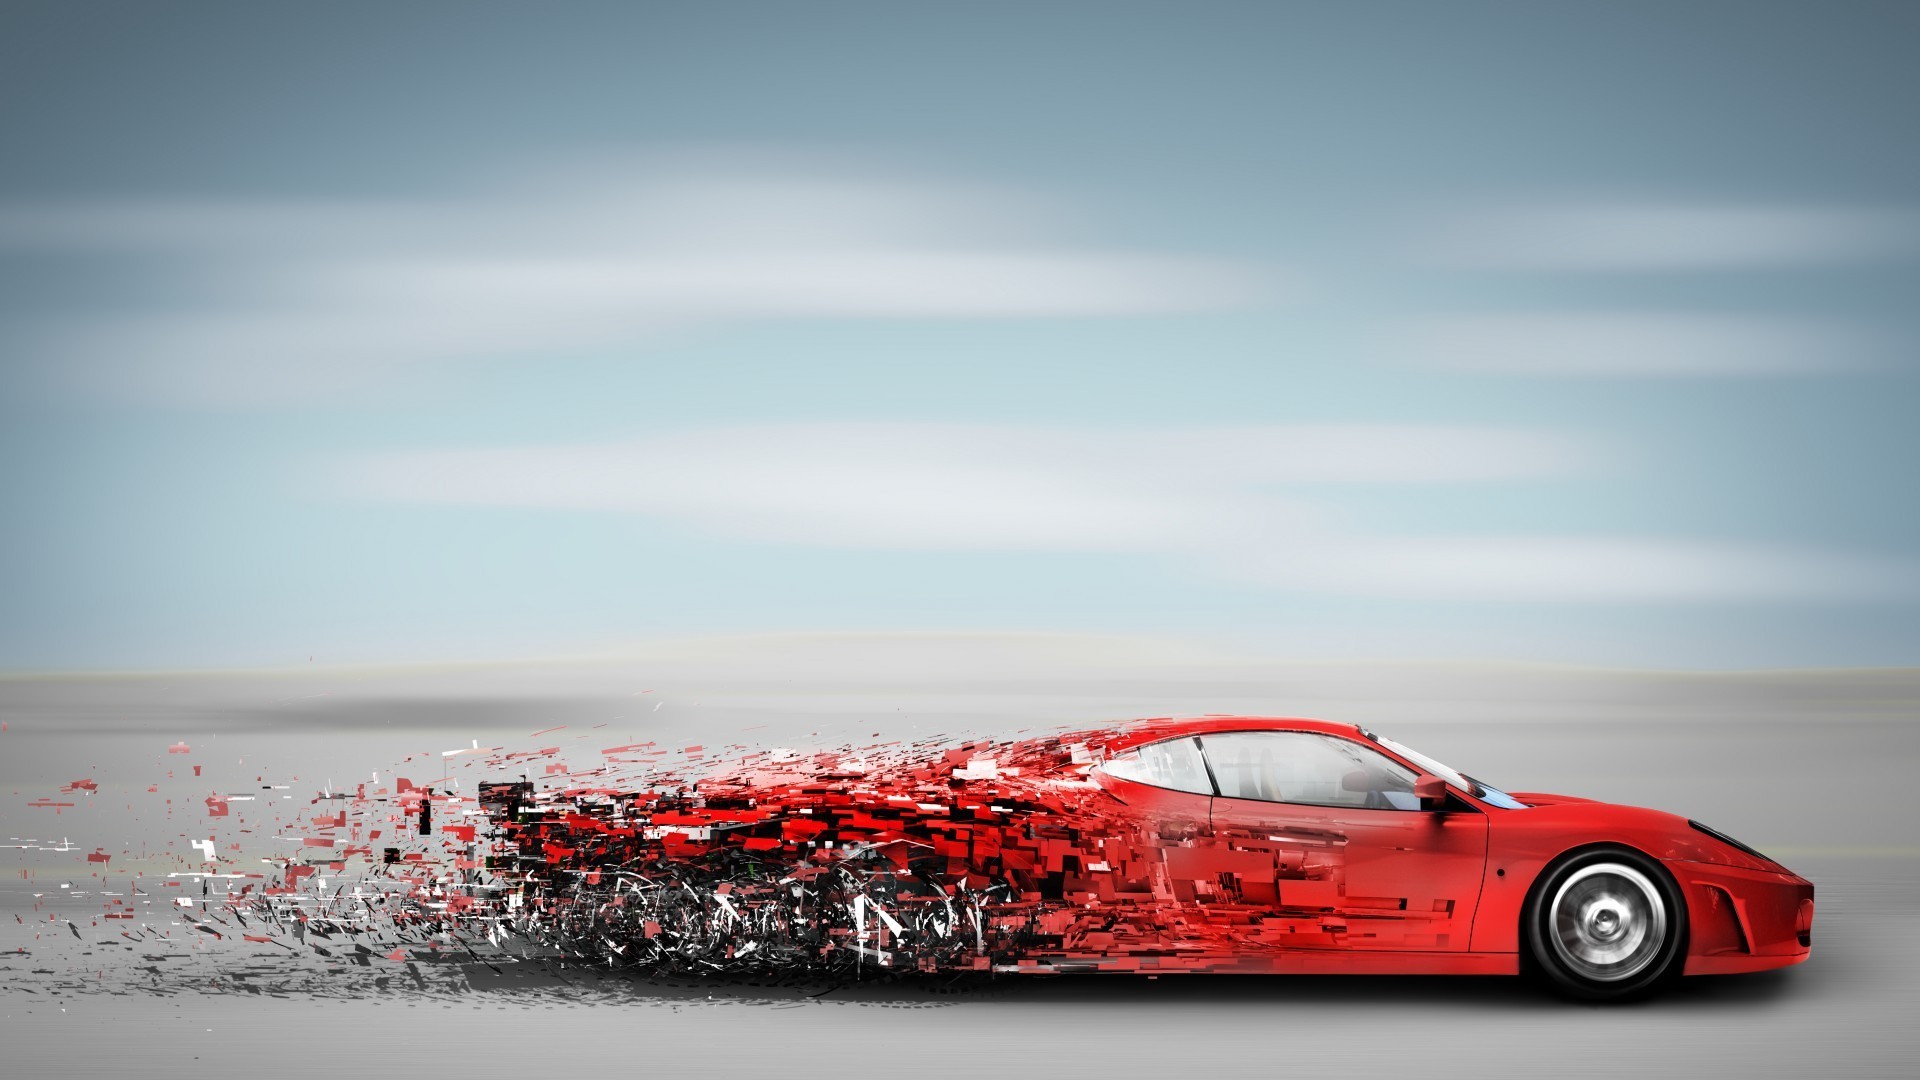 1920x1080 Red Ferrari falls to pieces in motion